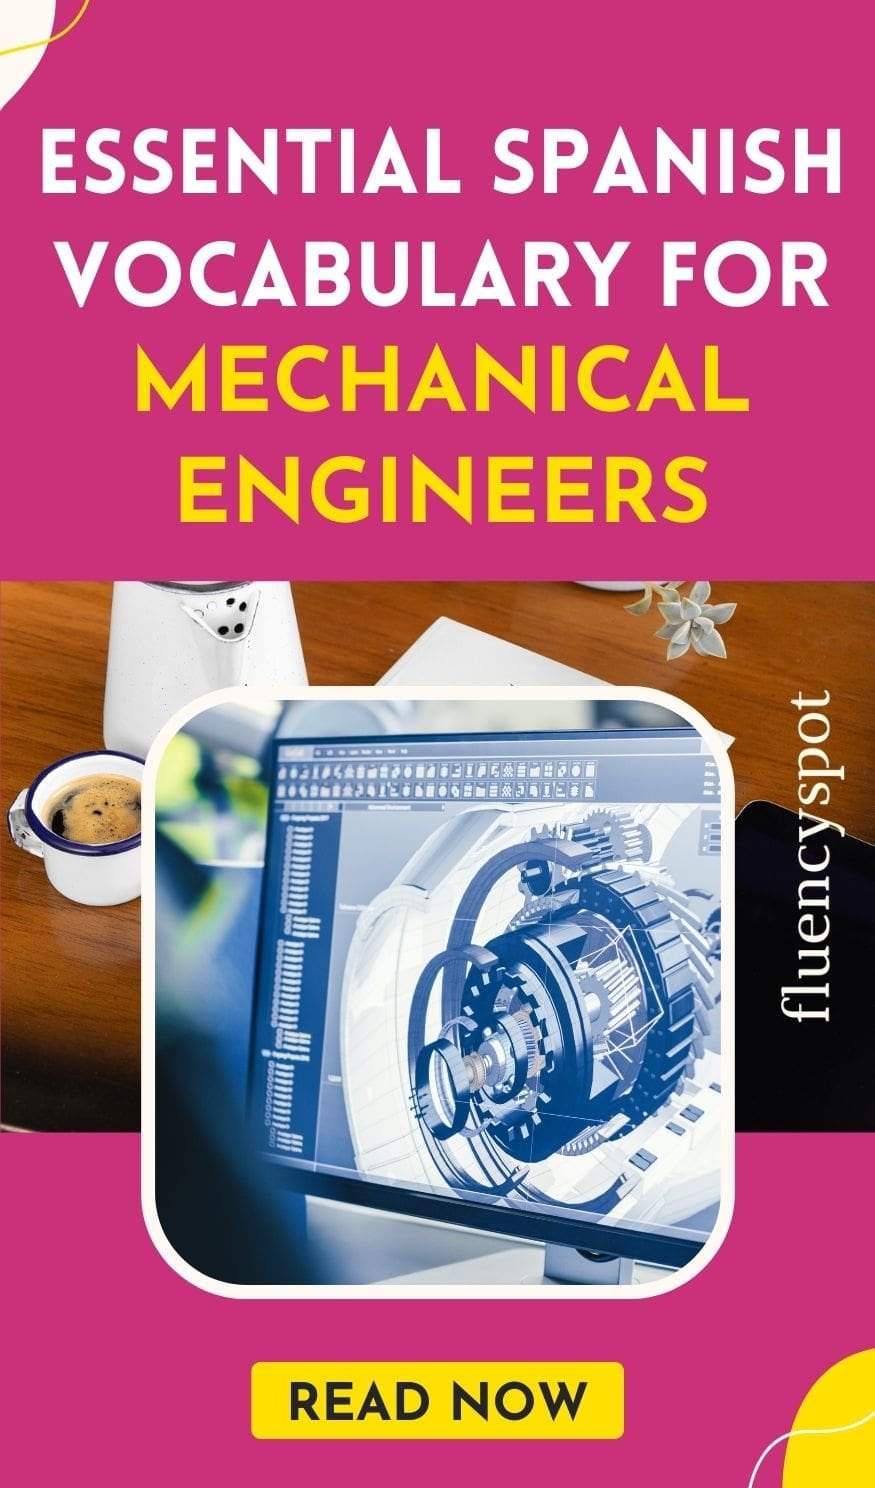 Essential Spanish Vocabulary for Mechanical Engineers